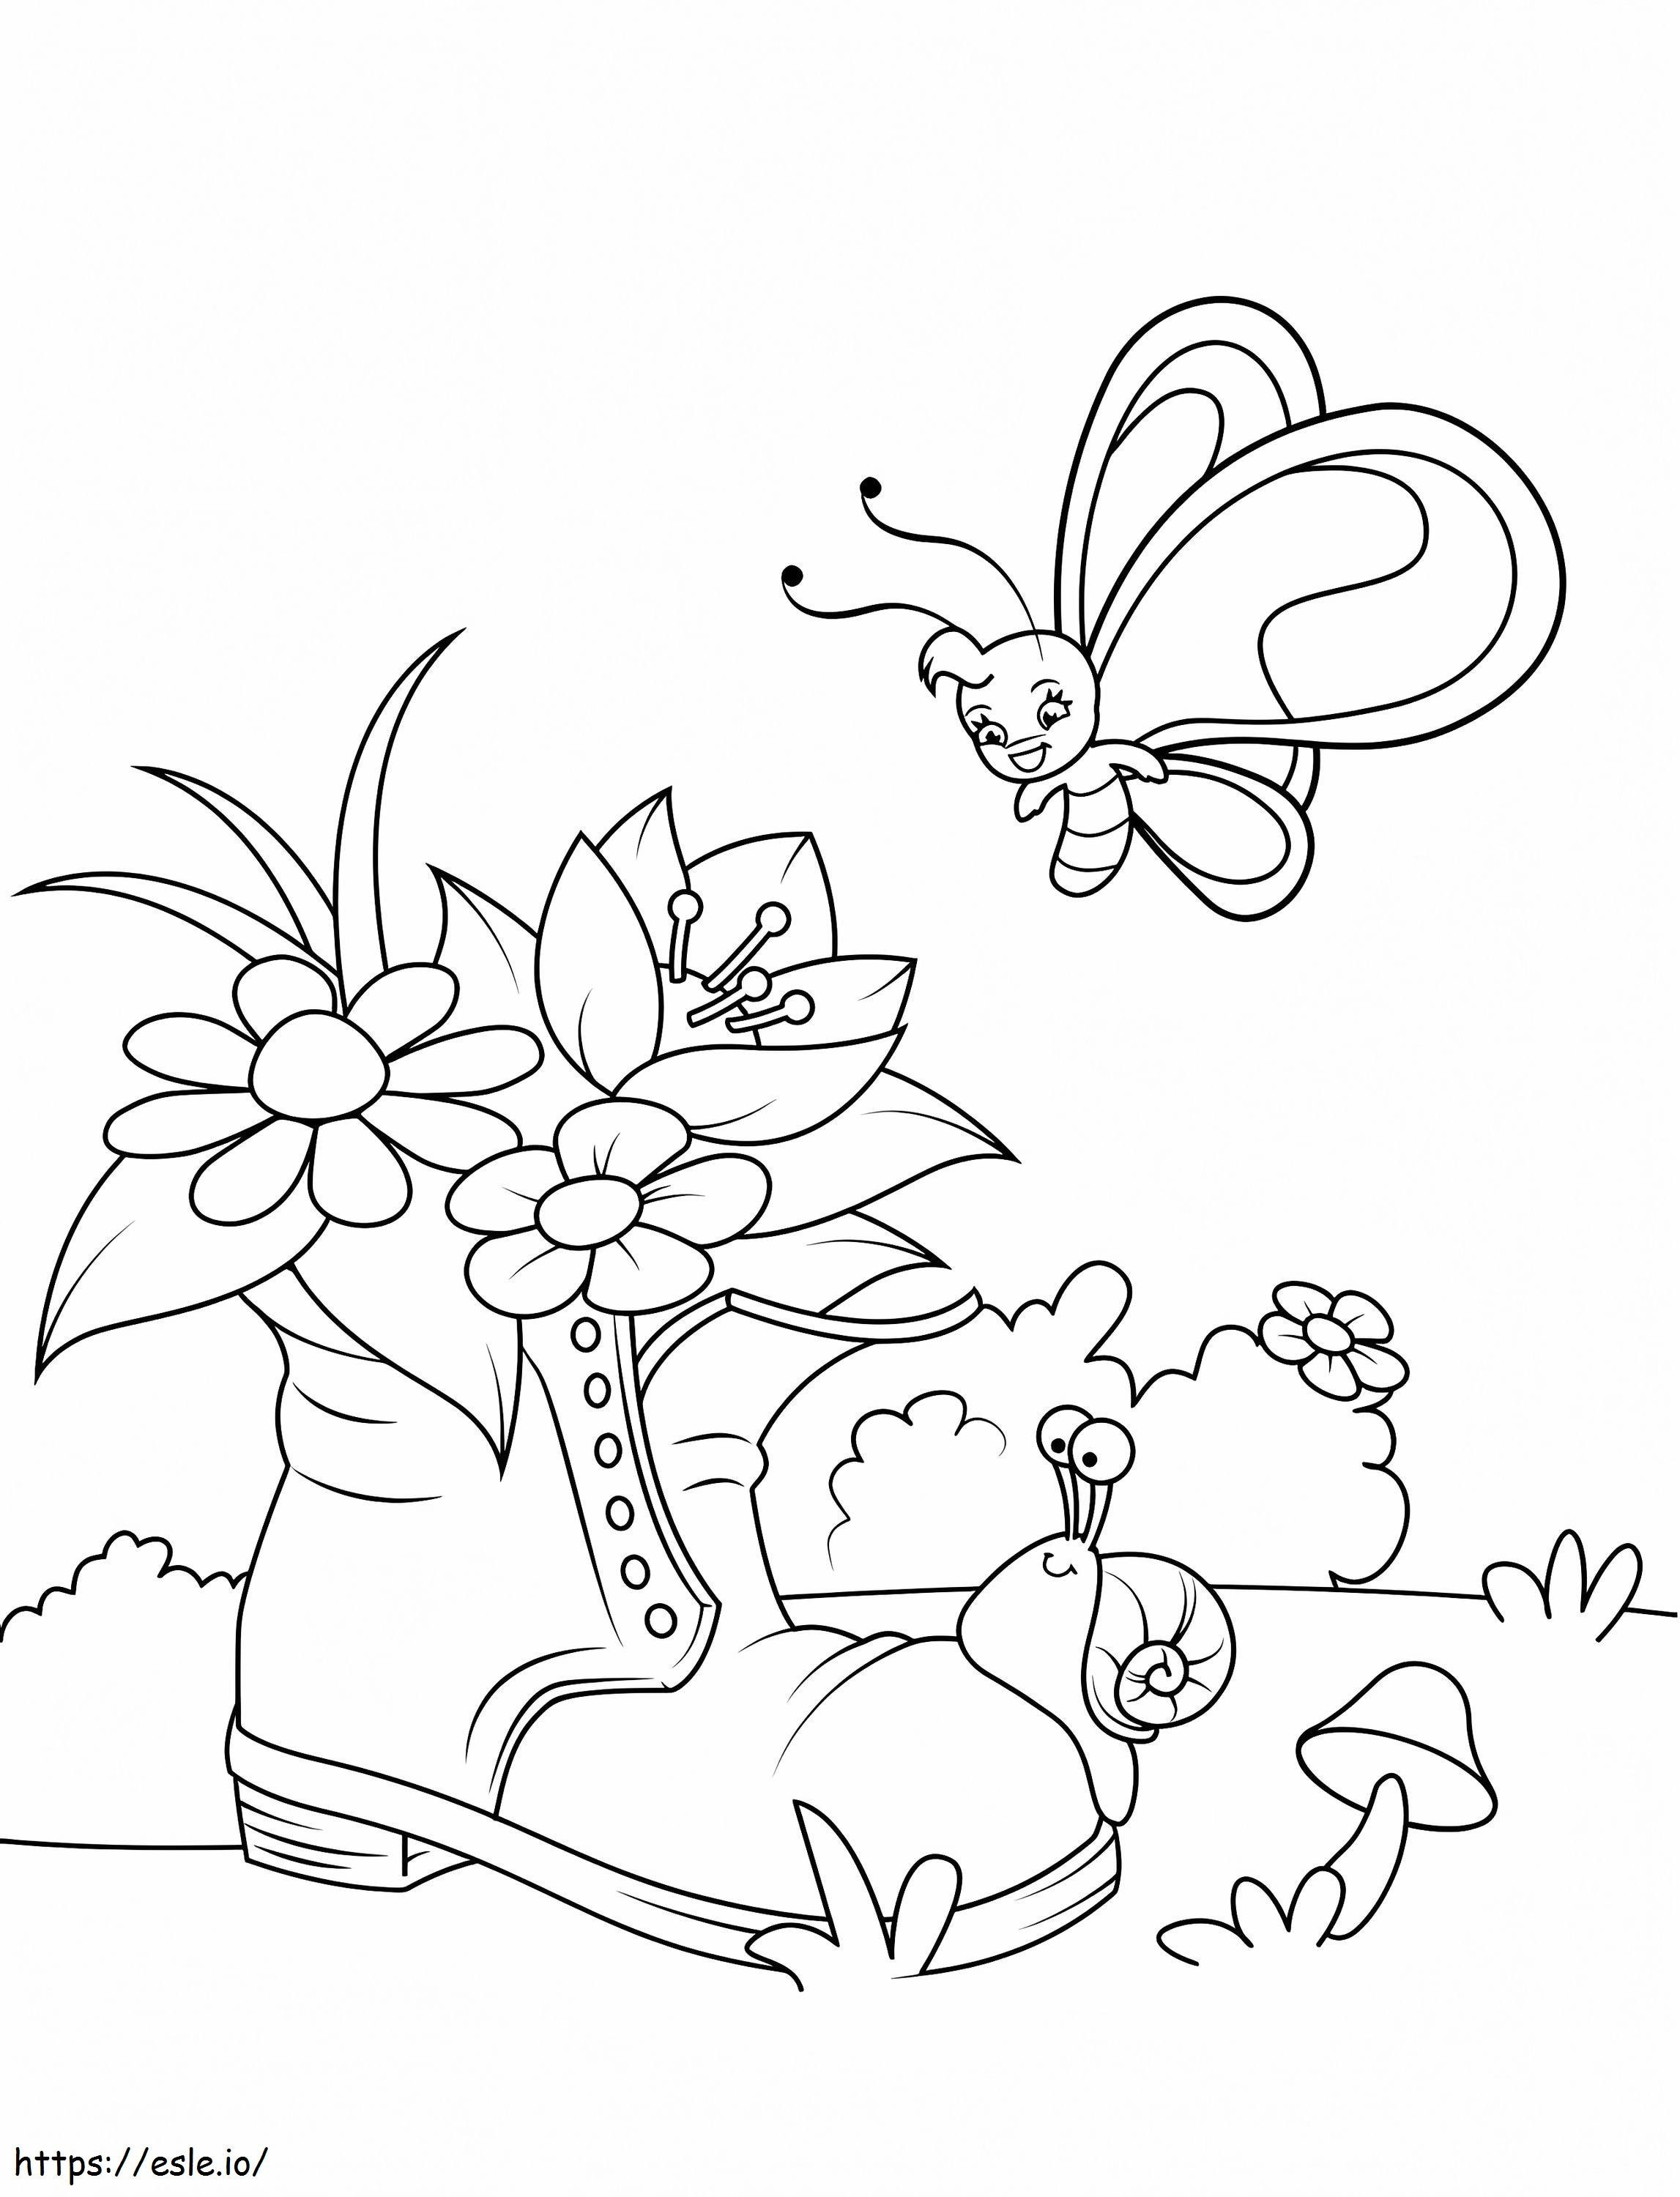 1560158921 Flowers In Old Shoe A4 coloring page